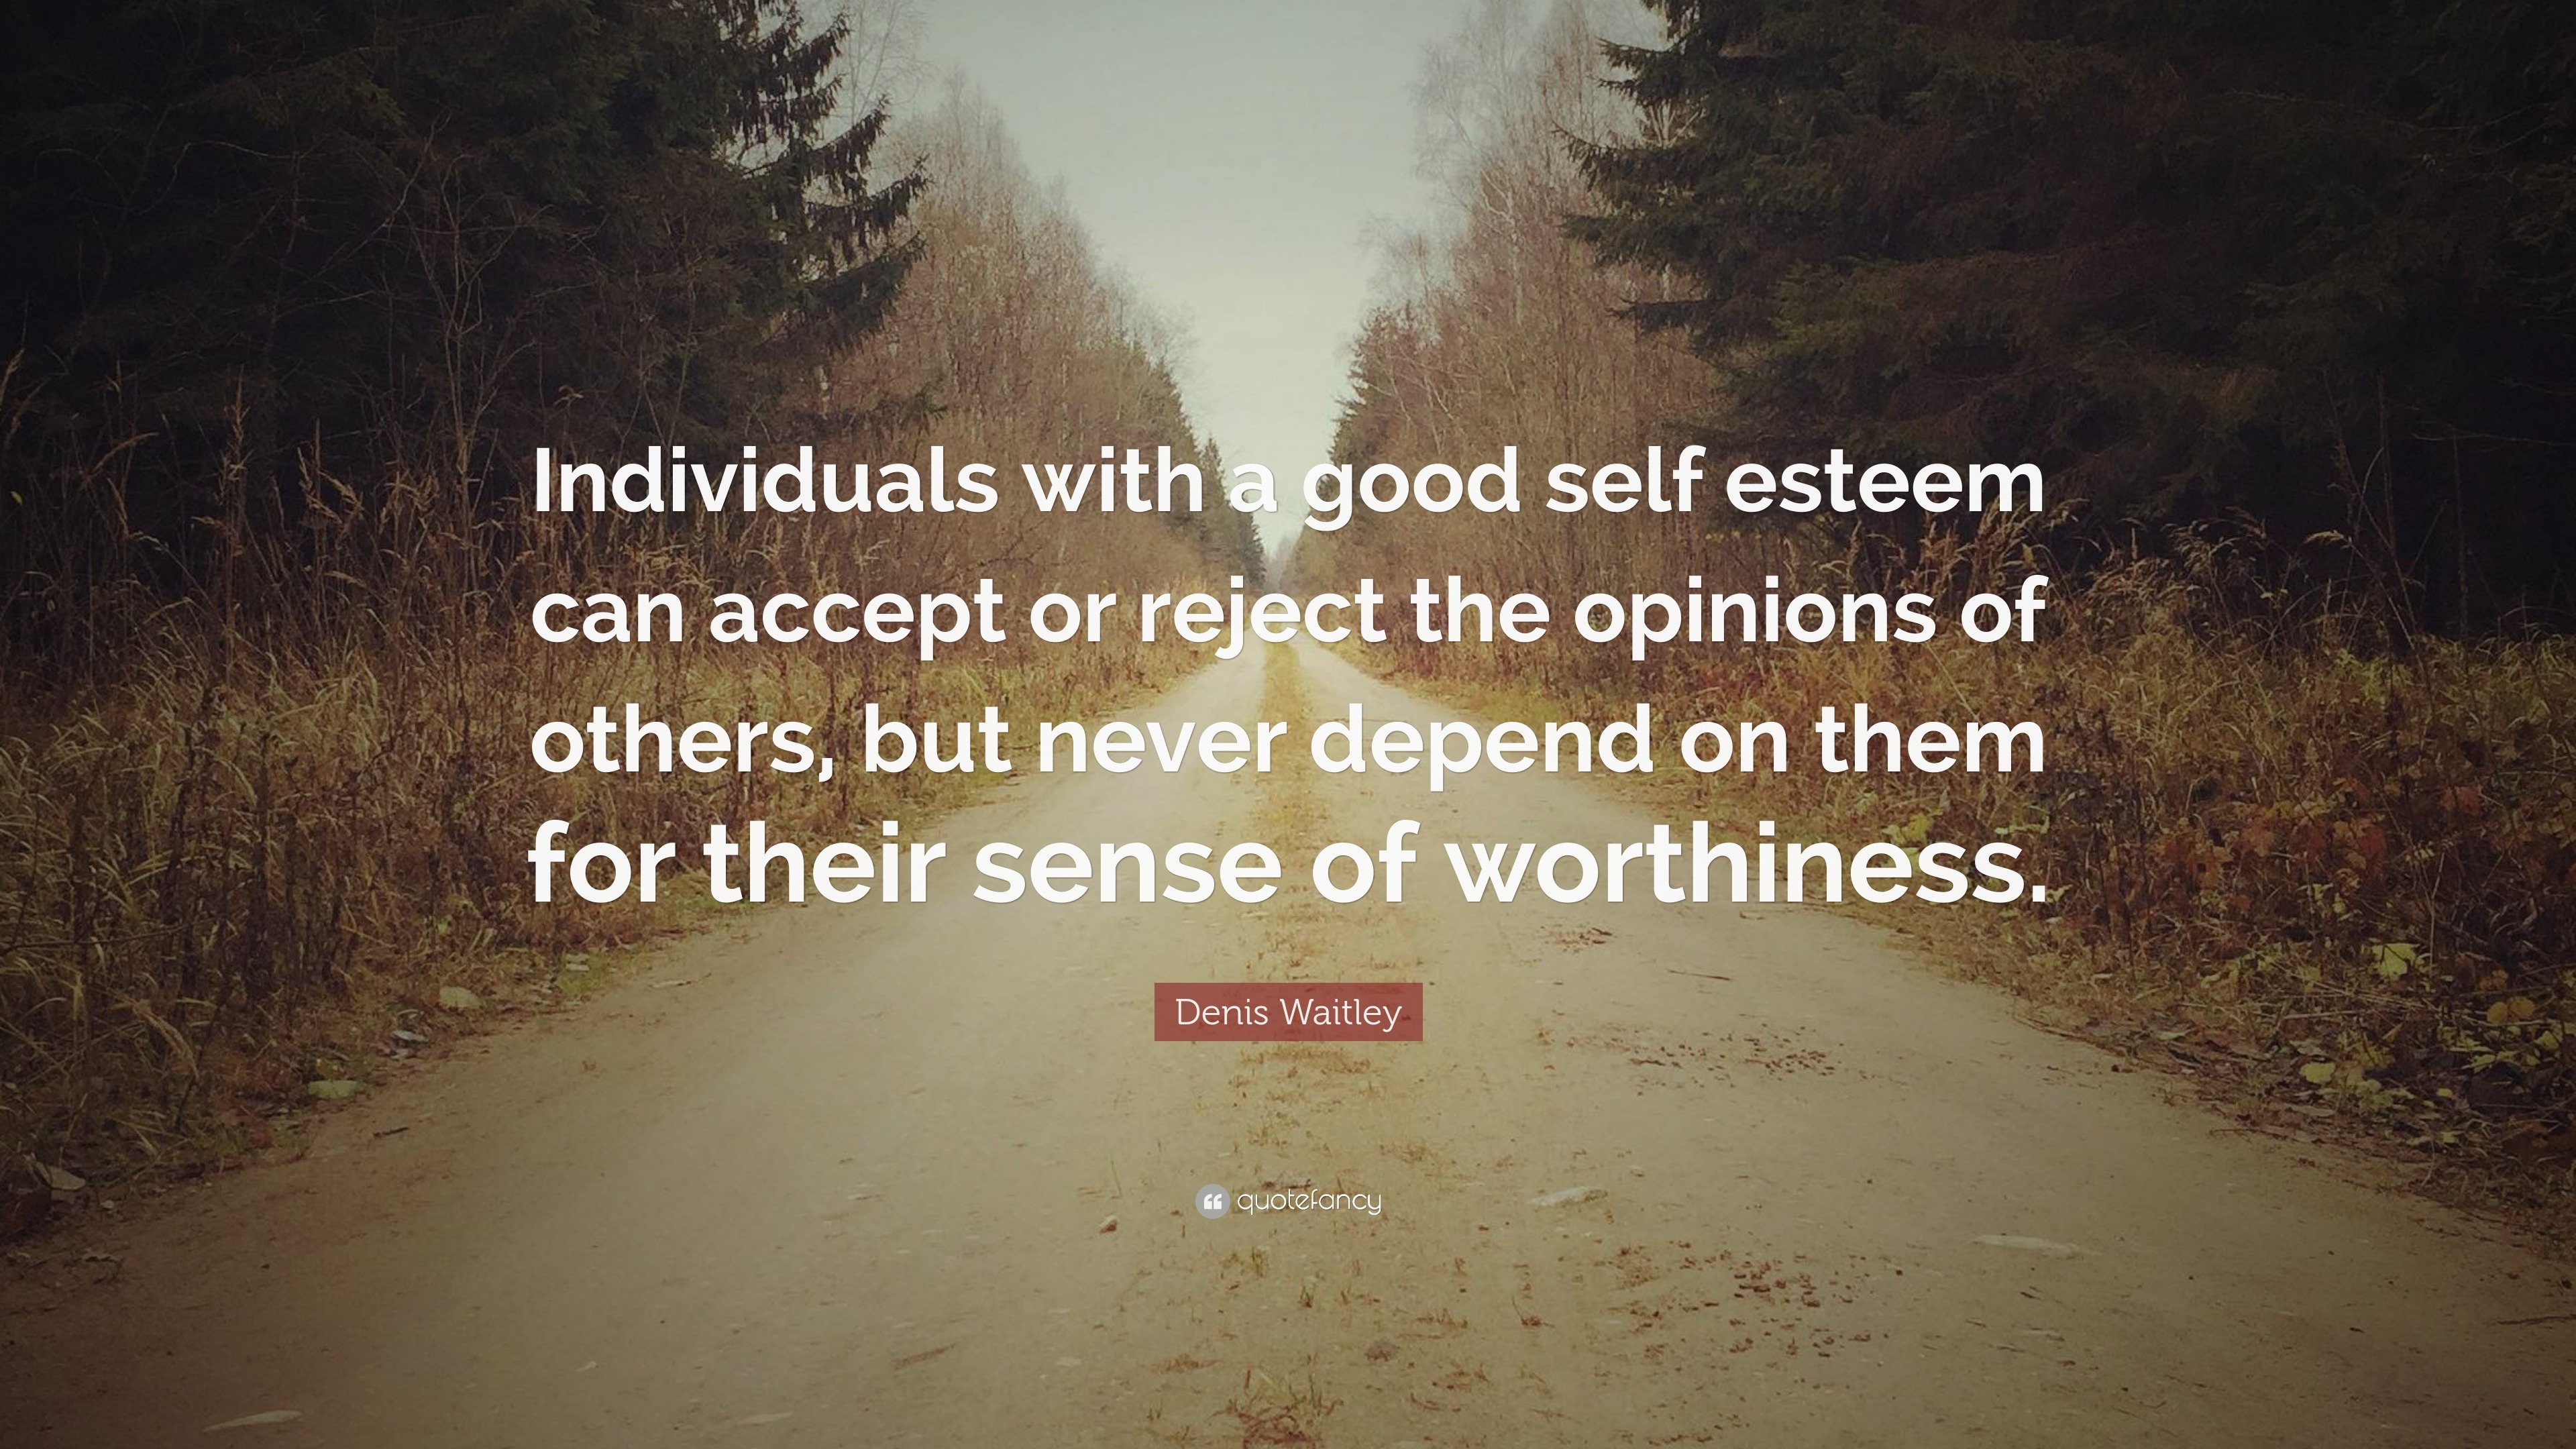 Denis Waitley Quote: “Individuals with a good self esteem can accept or ...